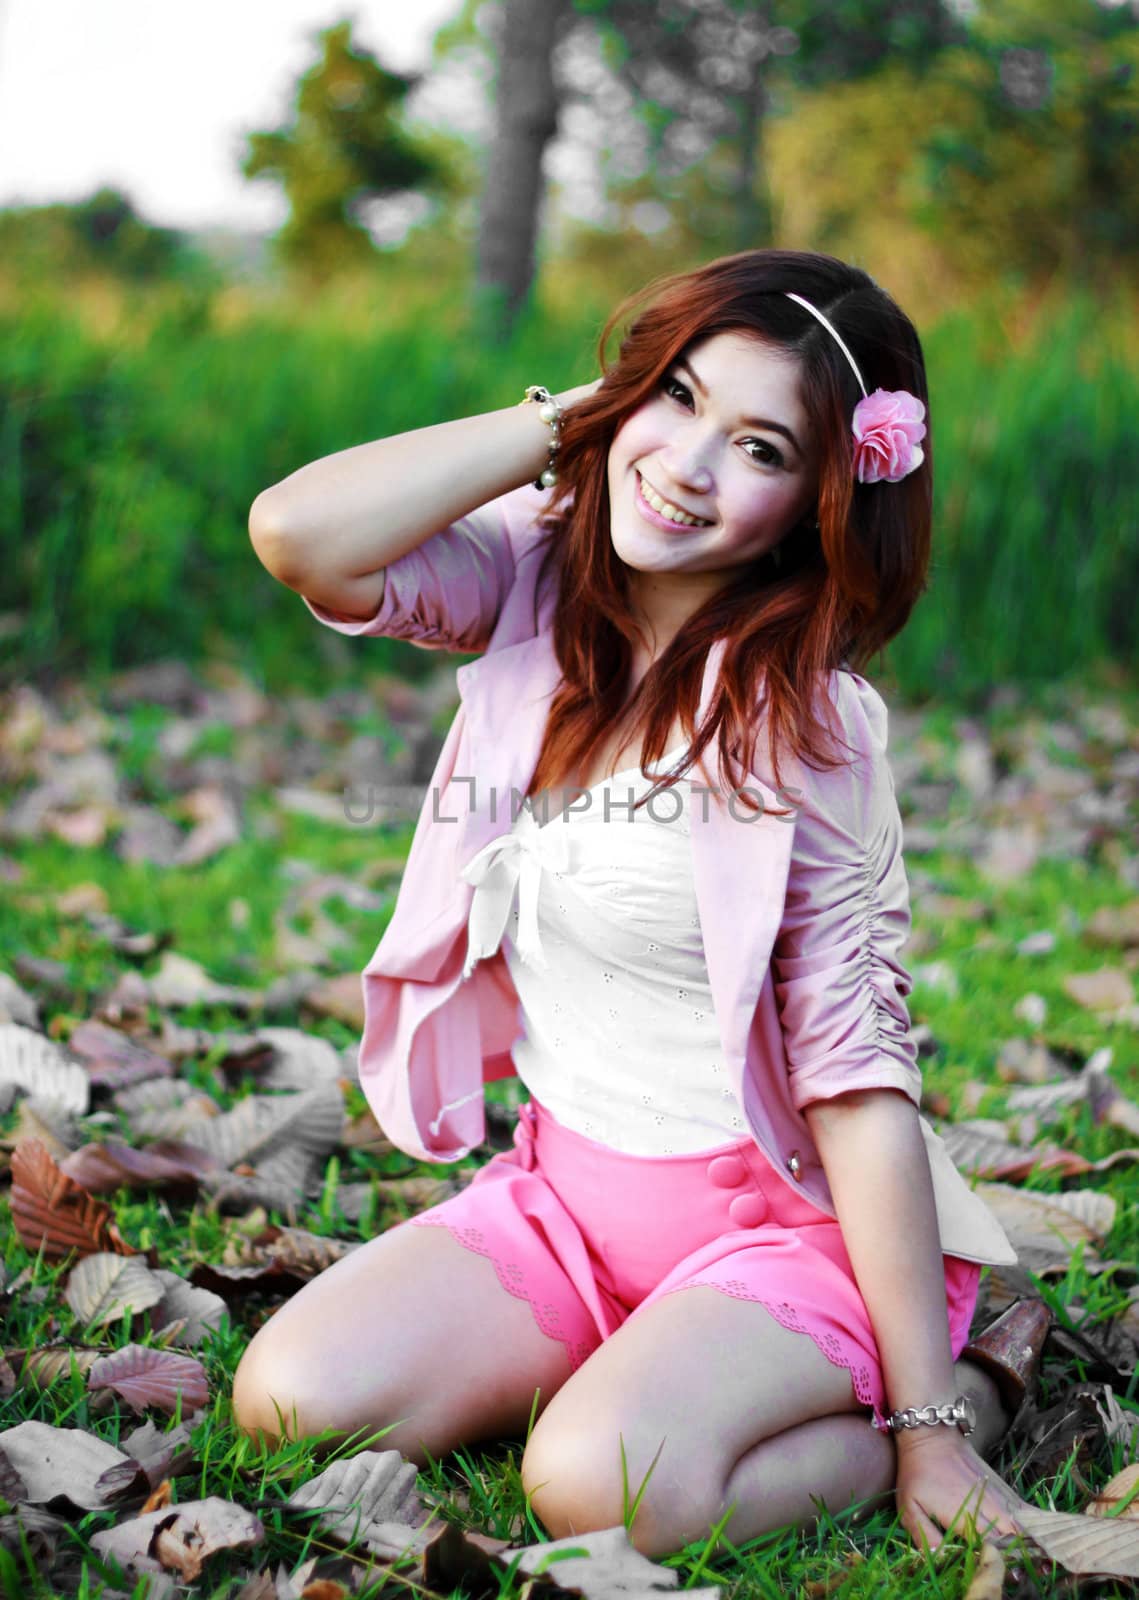 Portrait of beautiful young Asian girl in the grass by geargodz